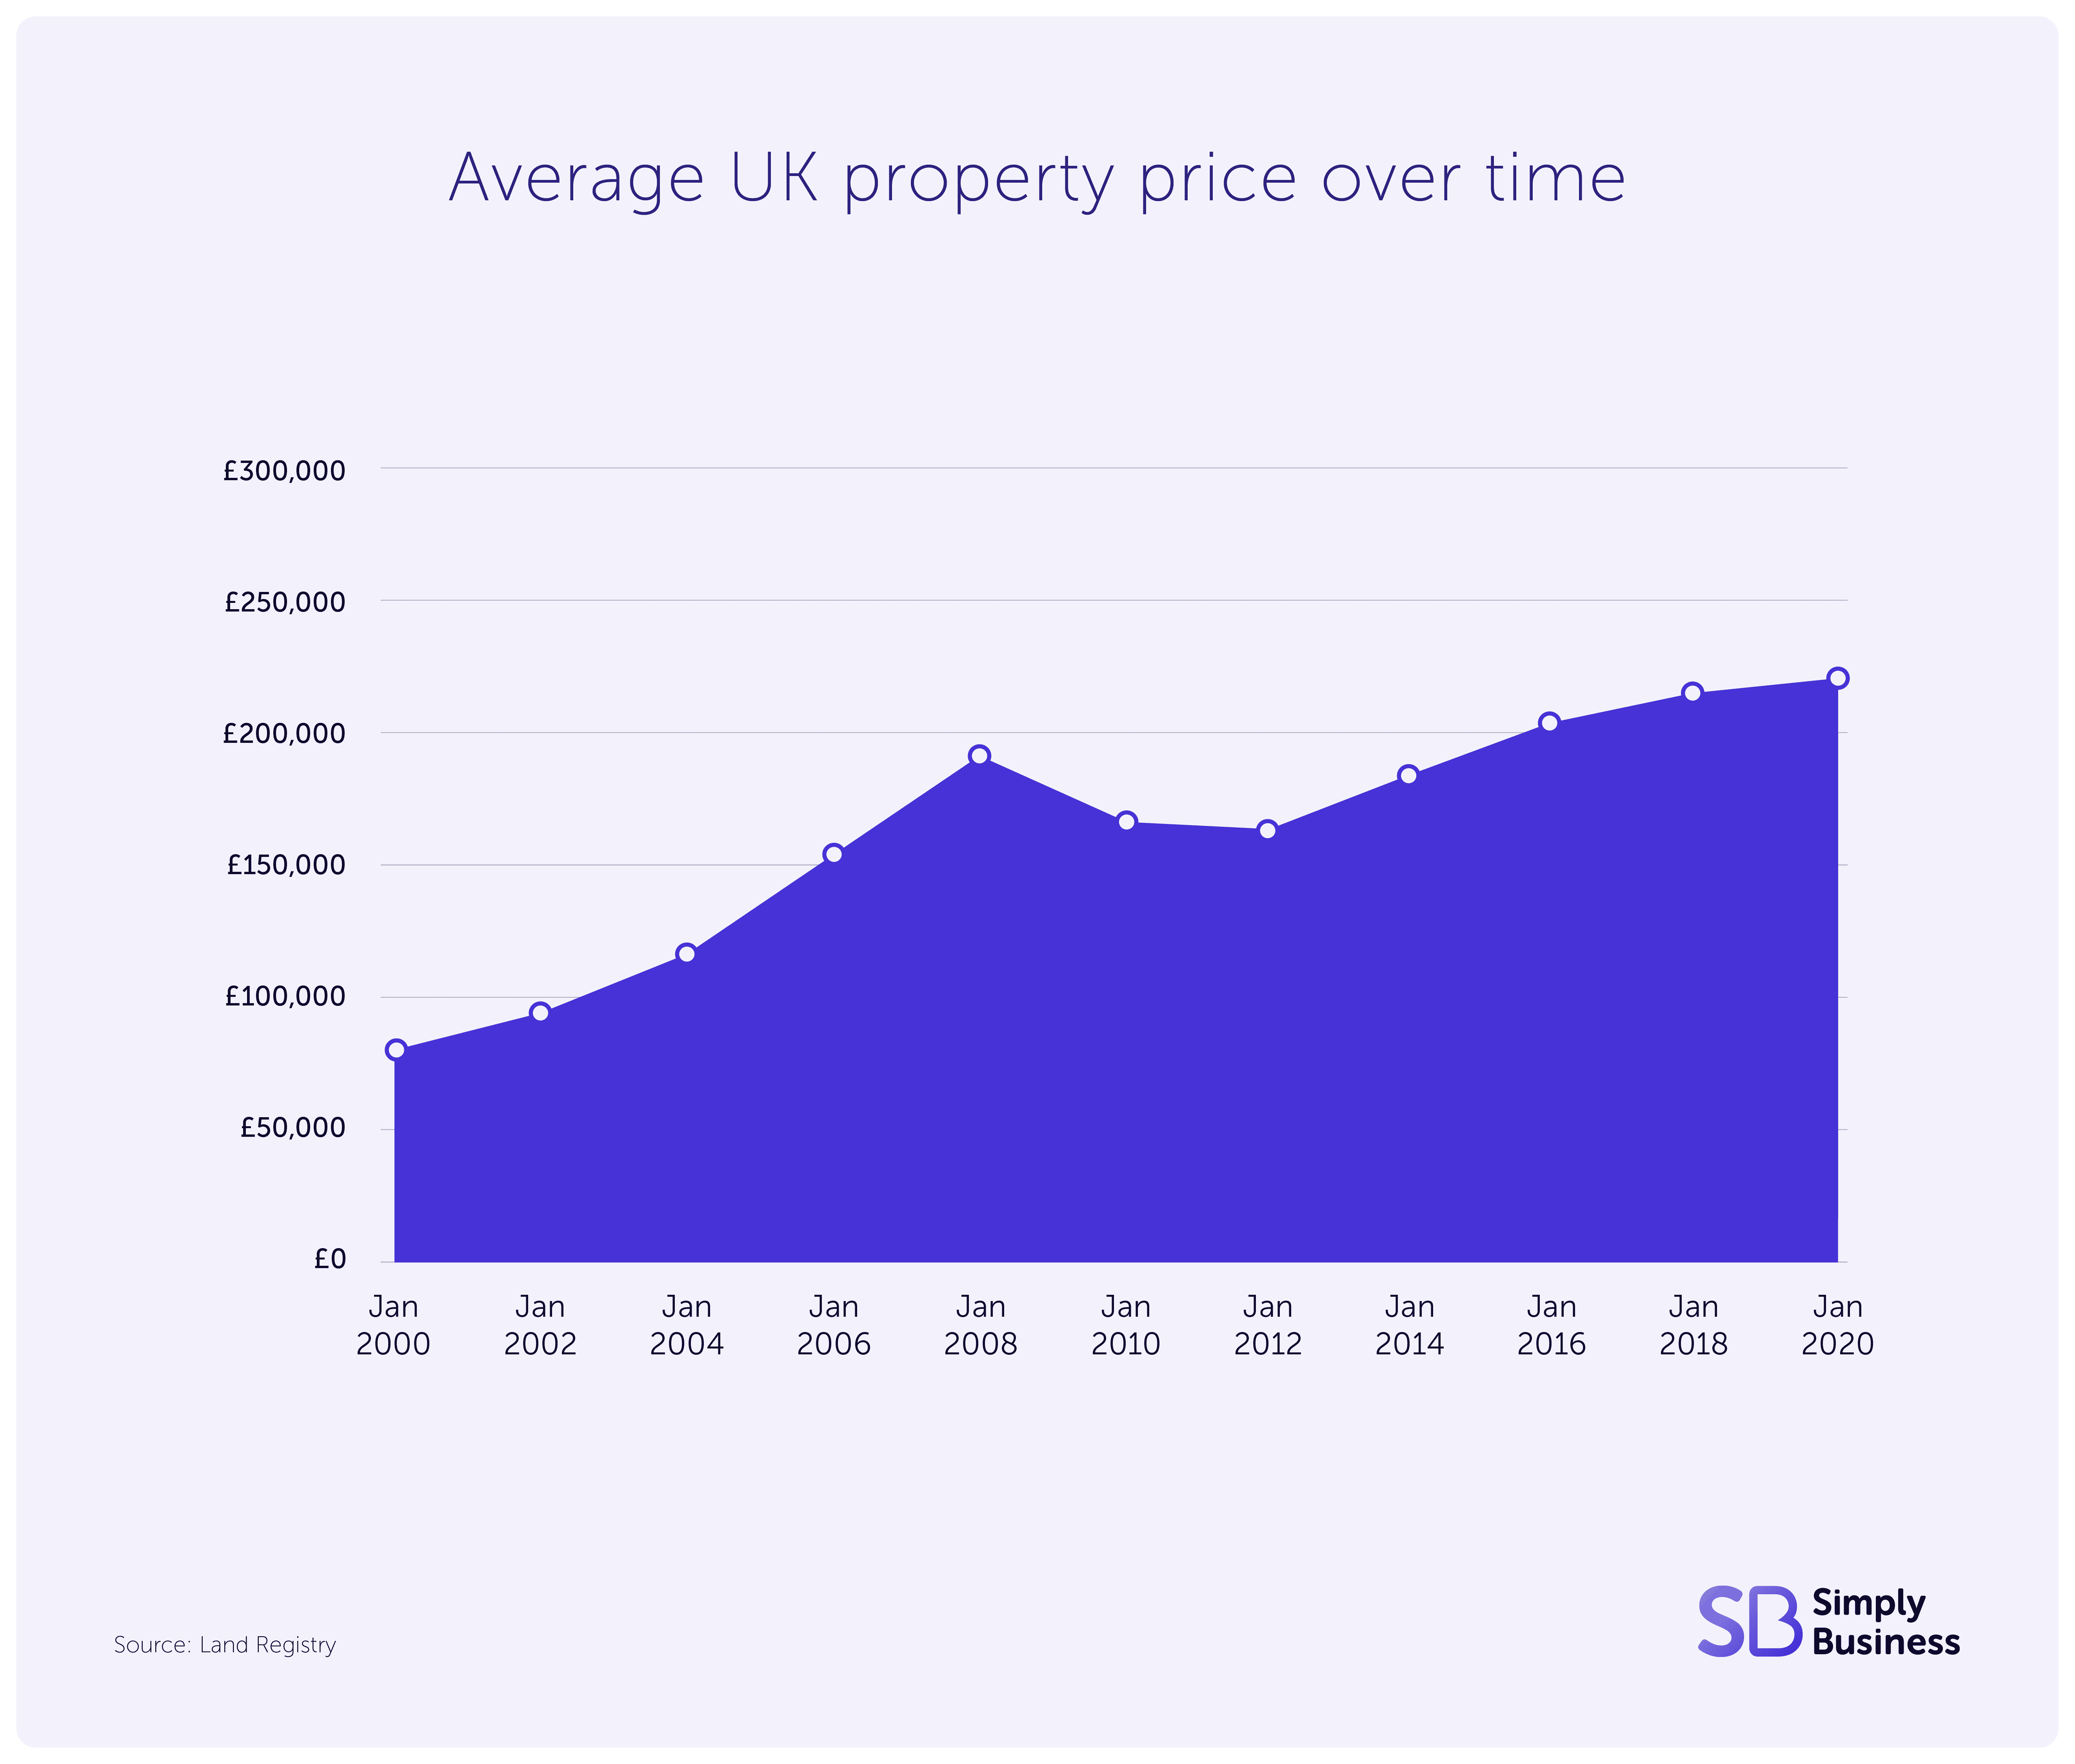 Graph showing the average UK property price between 2000 and 2020